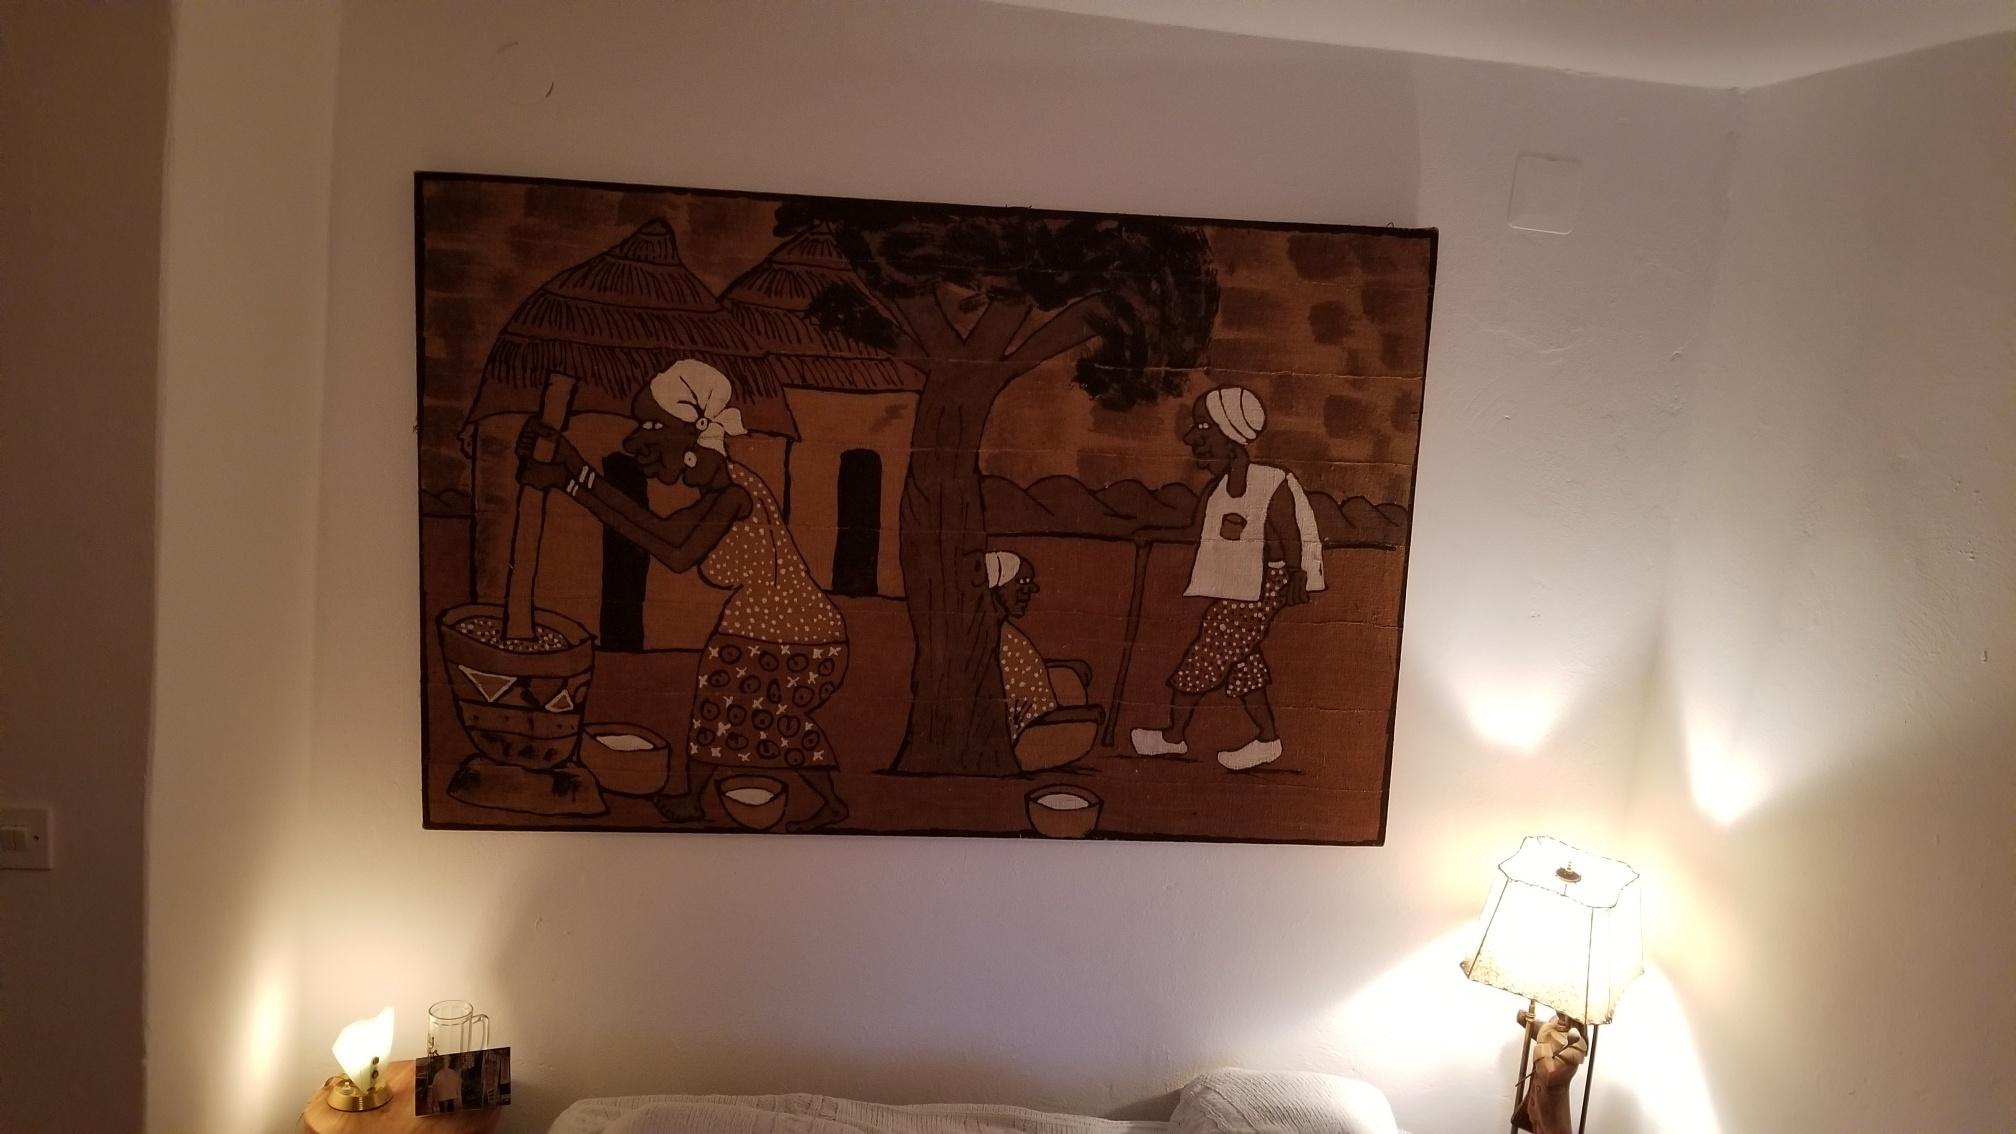 Italian mid century painting with an African motif. Painting is made on cotton canvas and mixture of tapestry and paint.
Panted by the artists of the African Diaspora. Painting was found at the prop house  in Accademia di Belle Arti di Venezia long